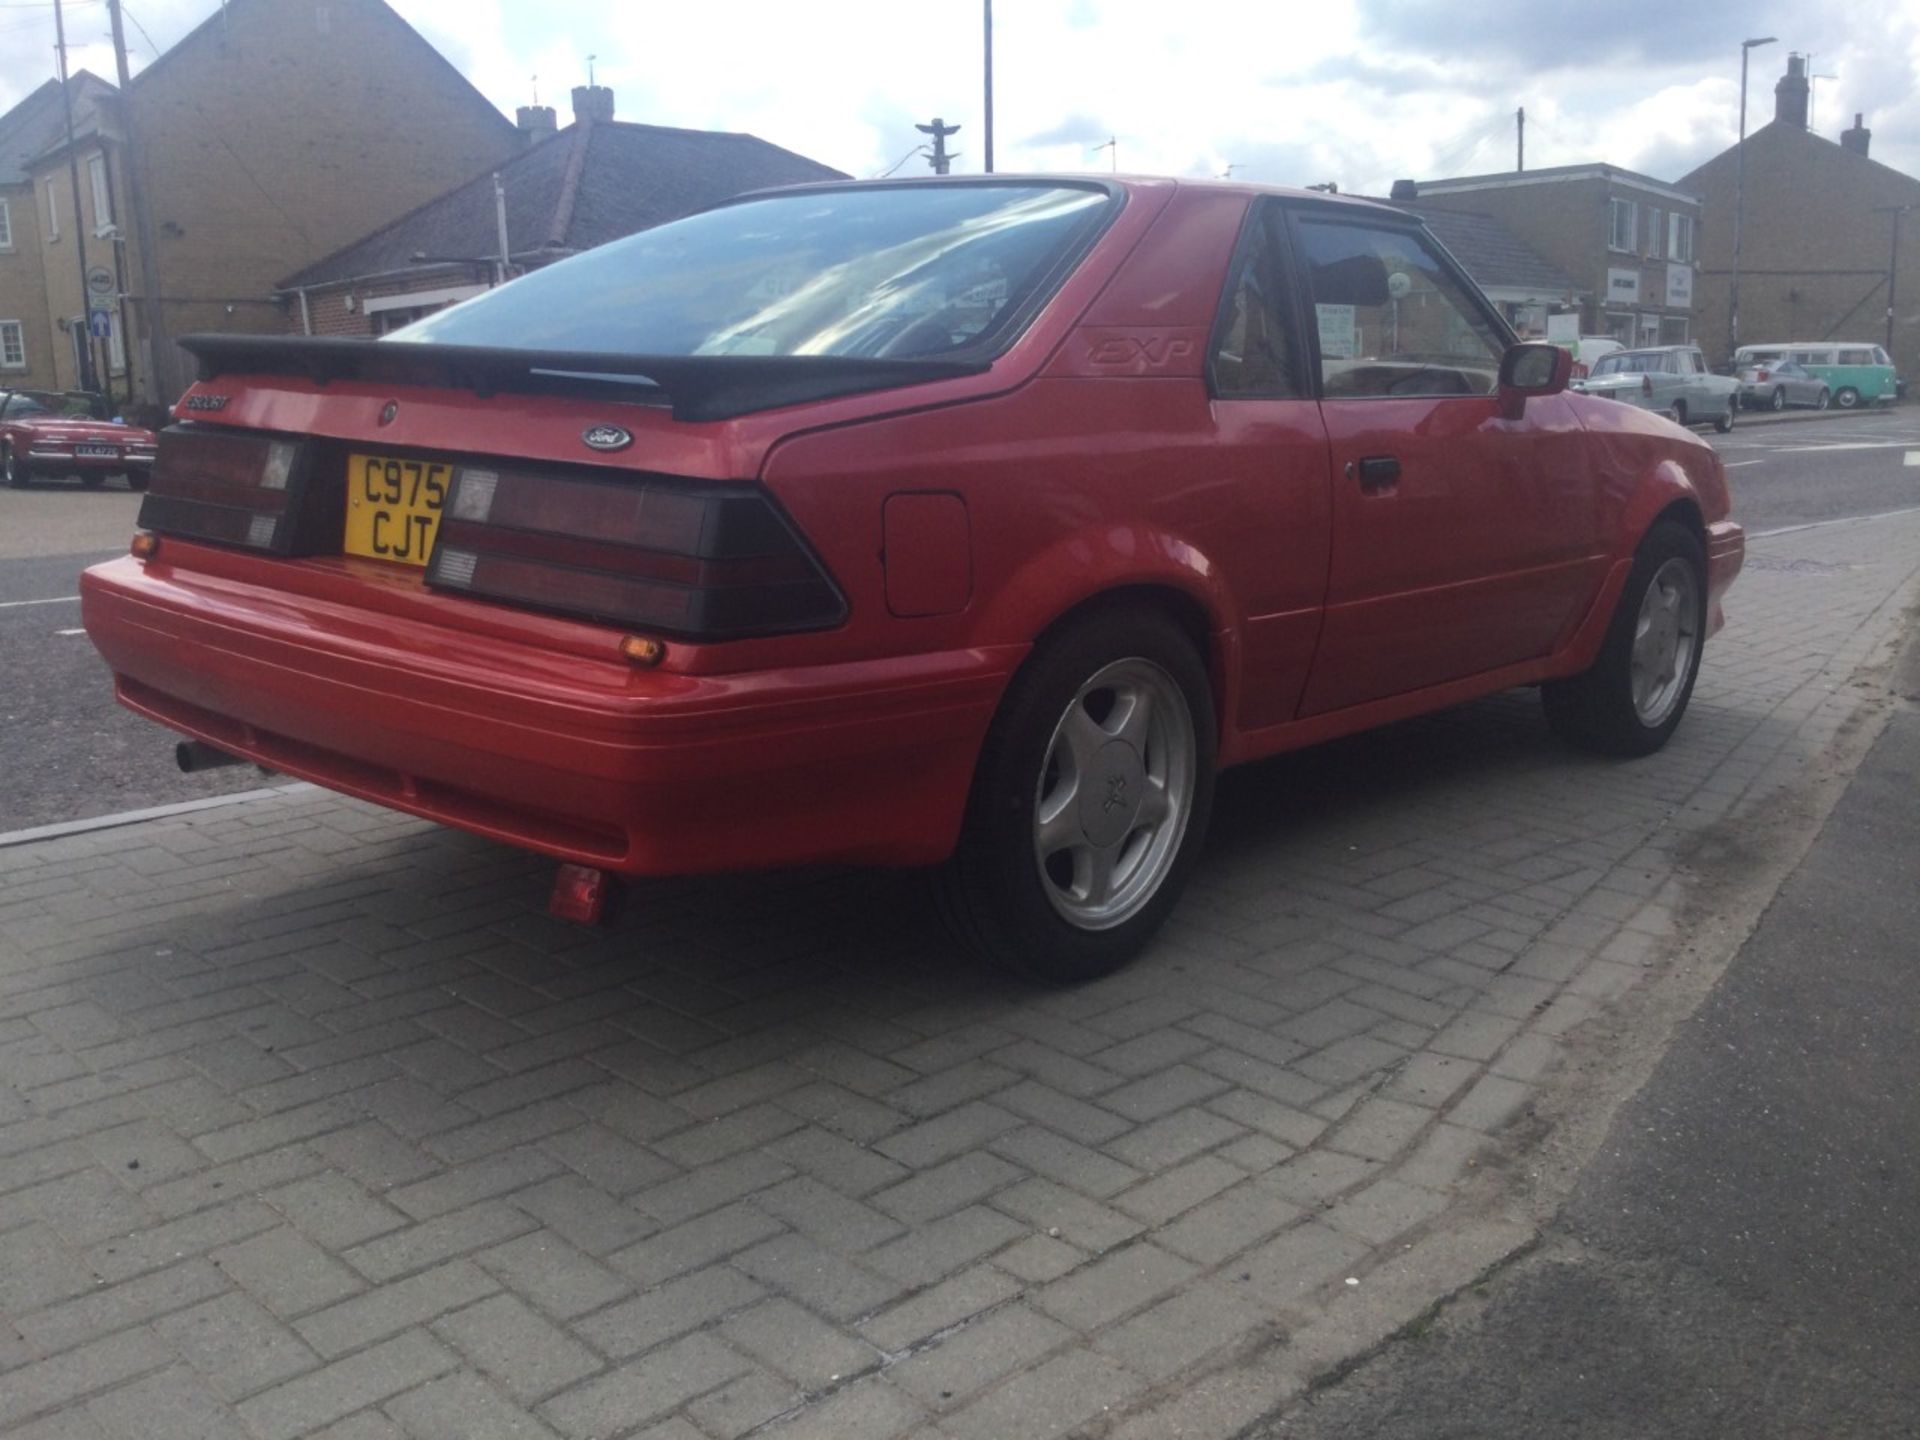 1986 Ford Escort 1.6 EXP Sports Coupe Auto LHD - Image 3 of 4